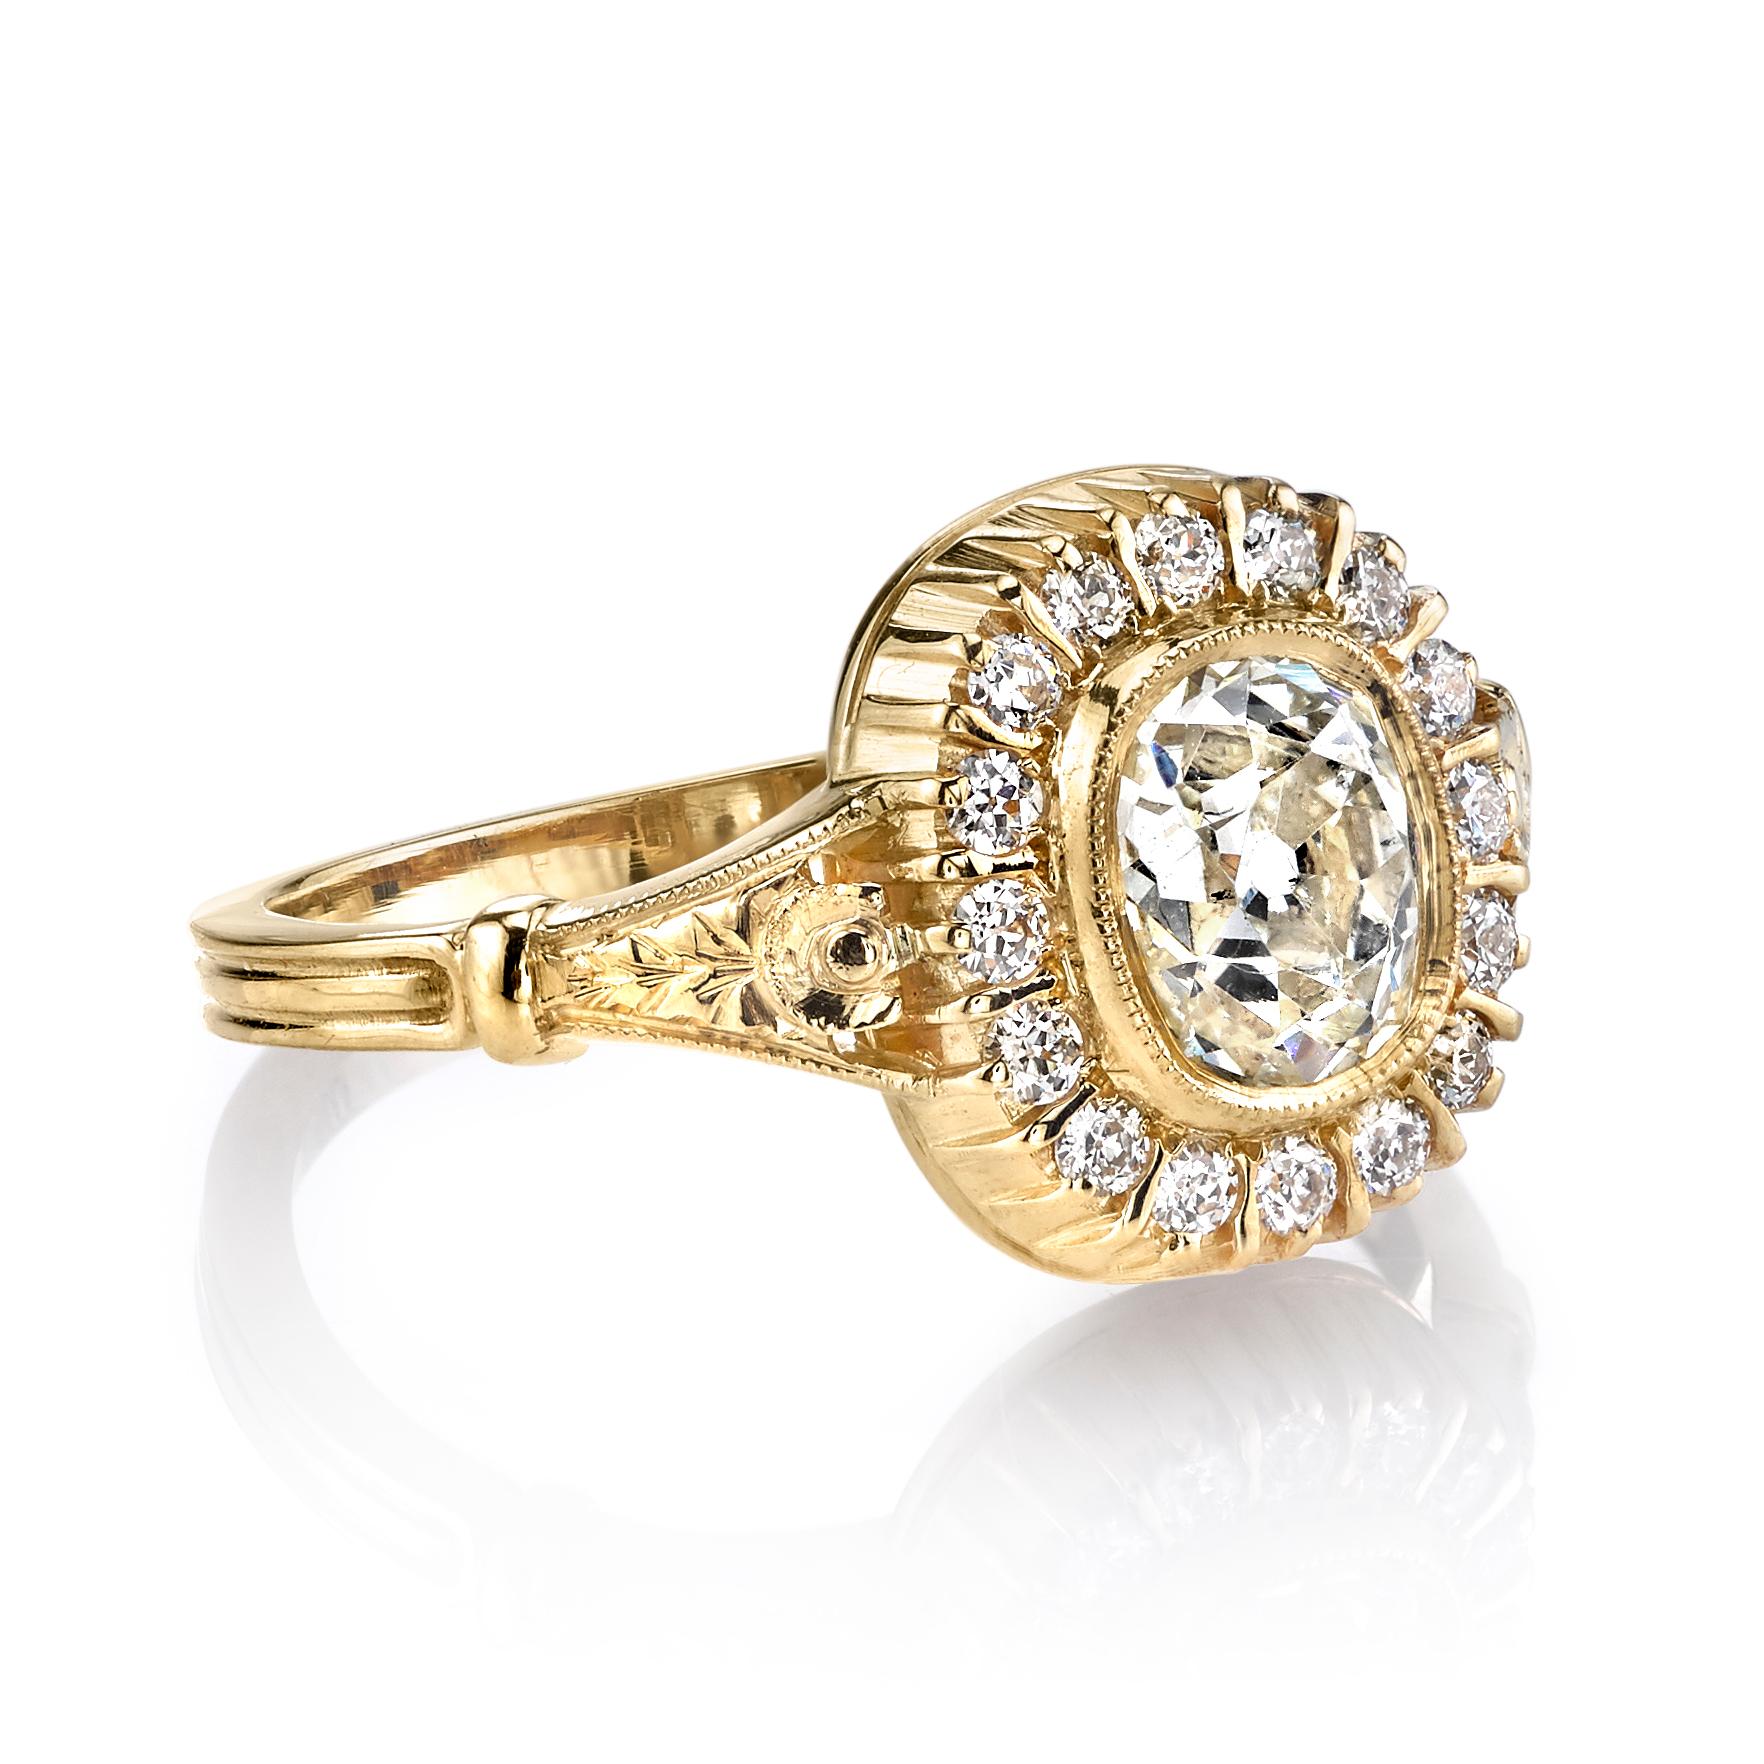 1.06ct N/SI1 GIA certified antique cushion cut diamond with 0.27ctw old European cut accent diamonds set in a handcrafted 18K yellow gold mounting.

Our jewelry is made locally in Los Angeles and most pieces are made to order. For these